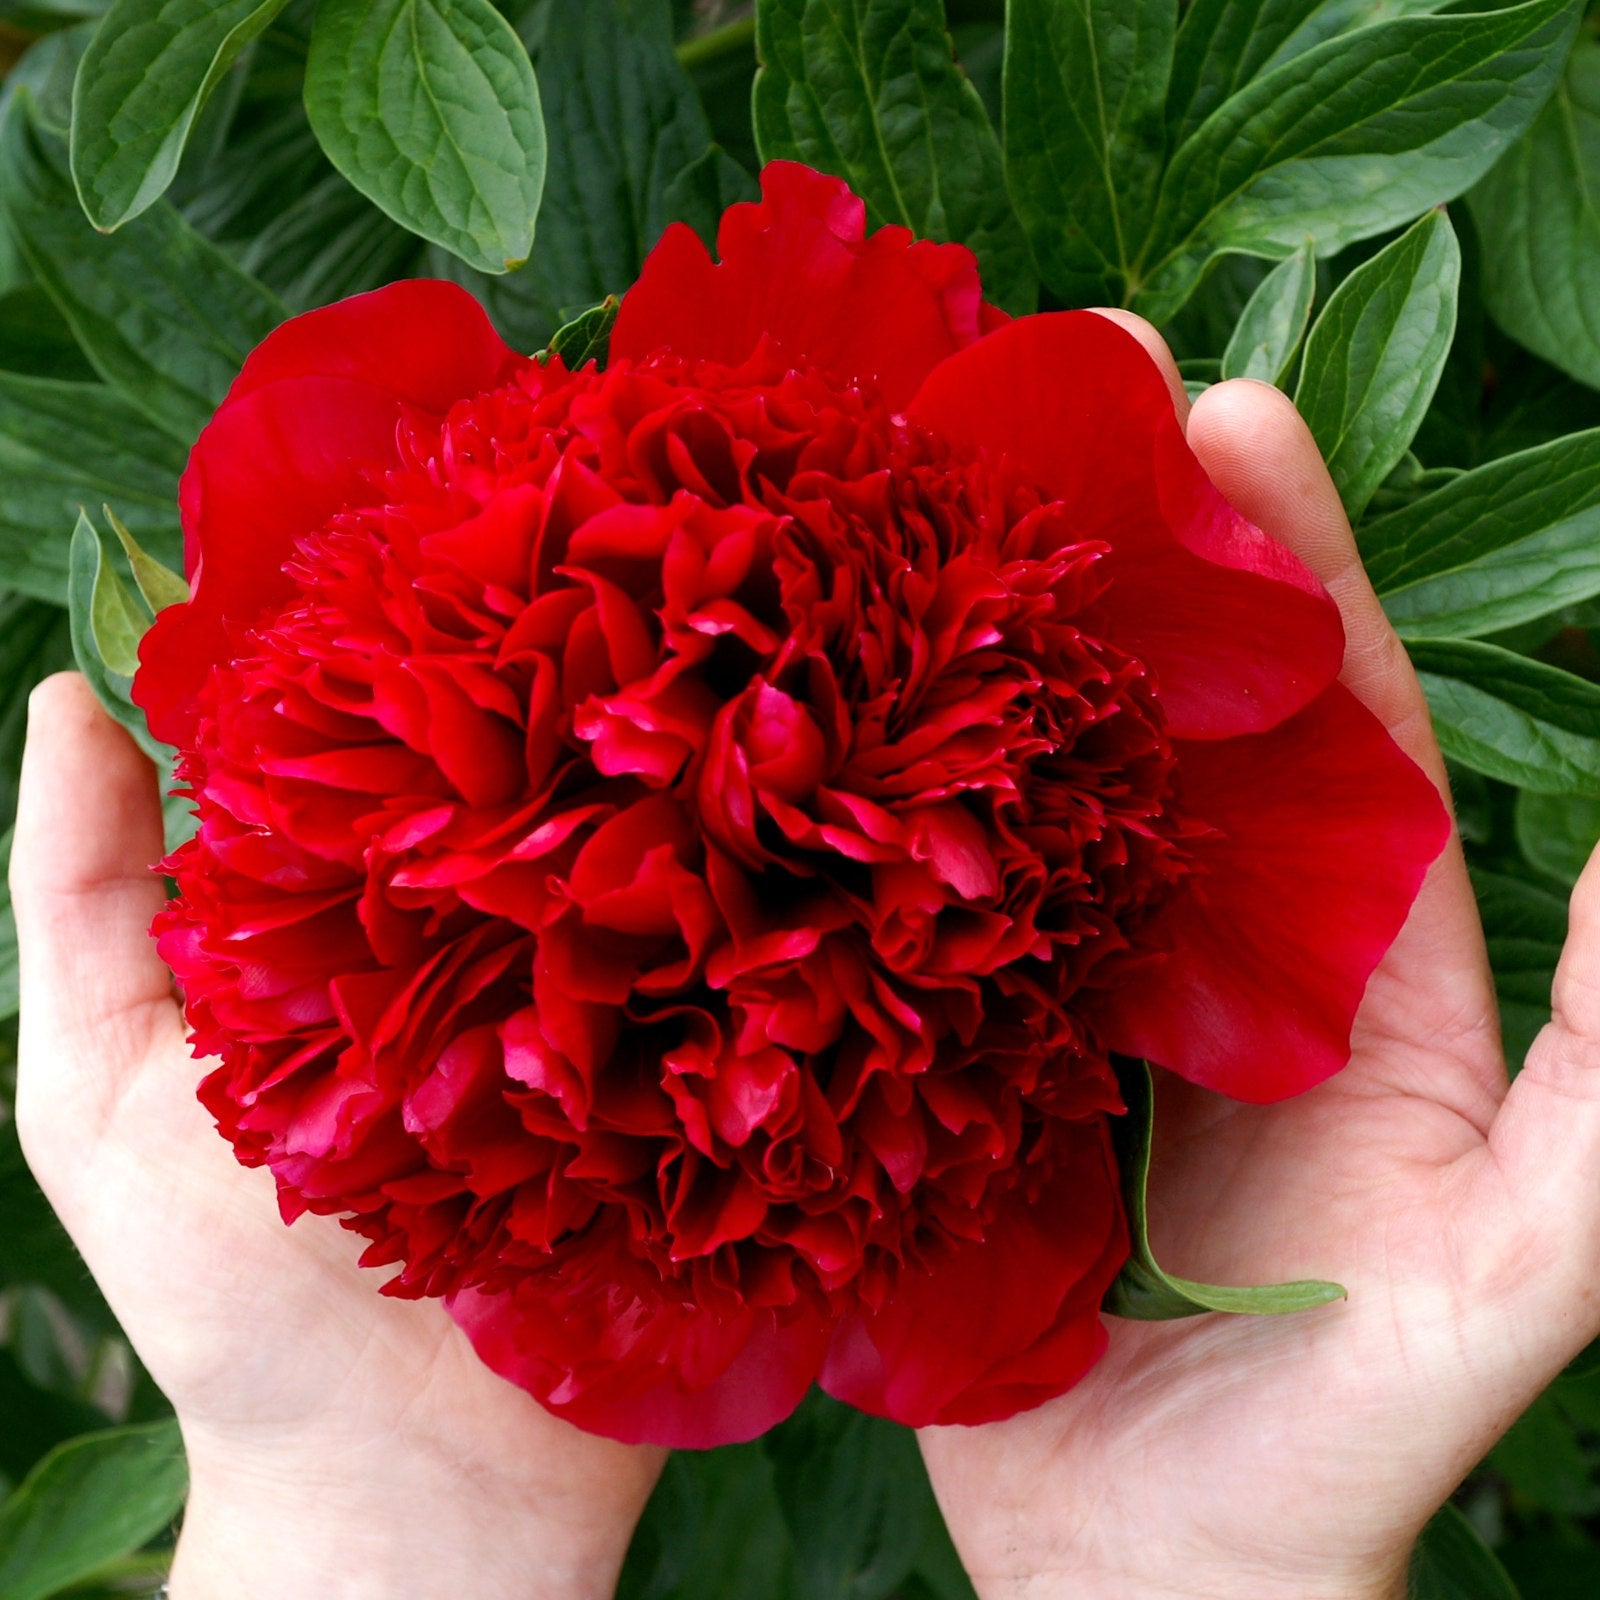 hund personlighed detaljer True Red Peony Bulbs For Sale Online | Red Charm (Fragrant) – Easy To Grow  Bulbs